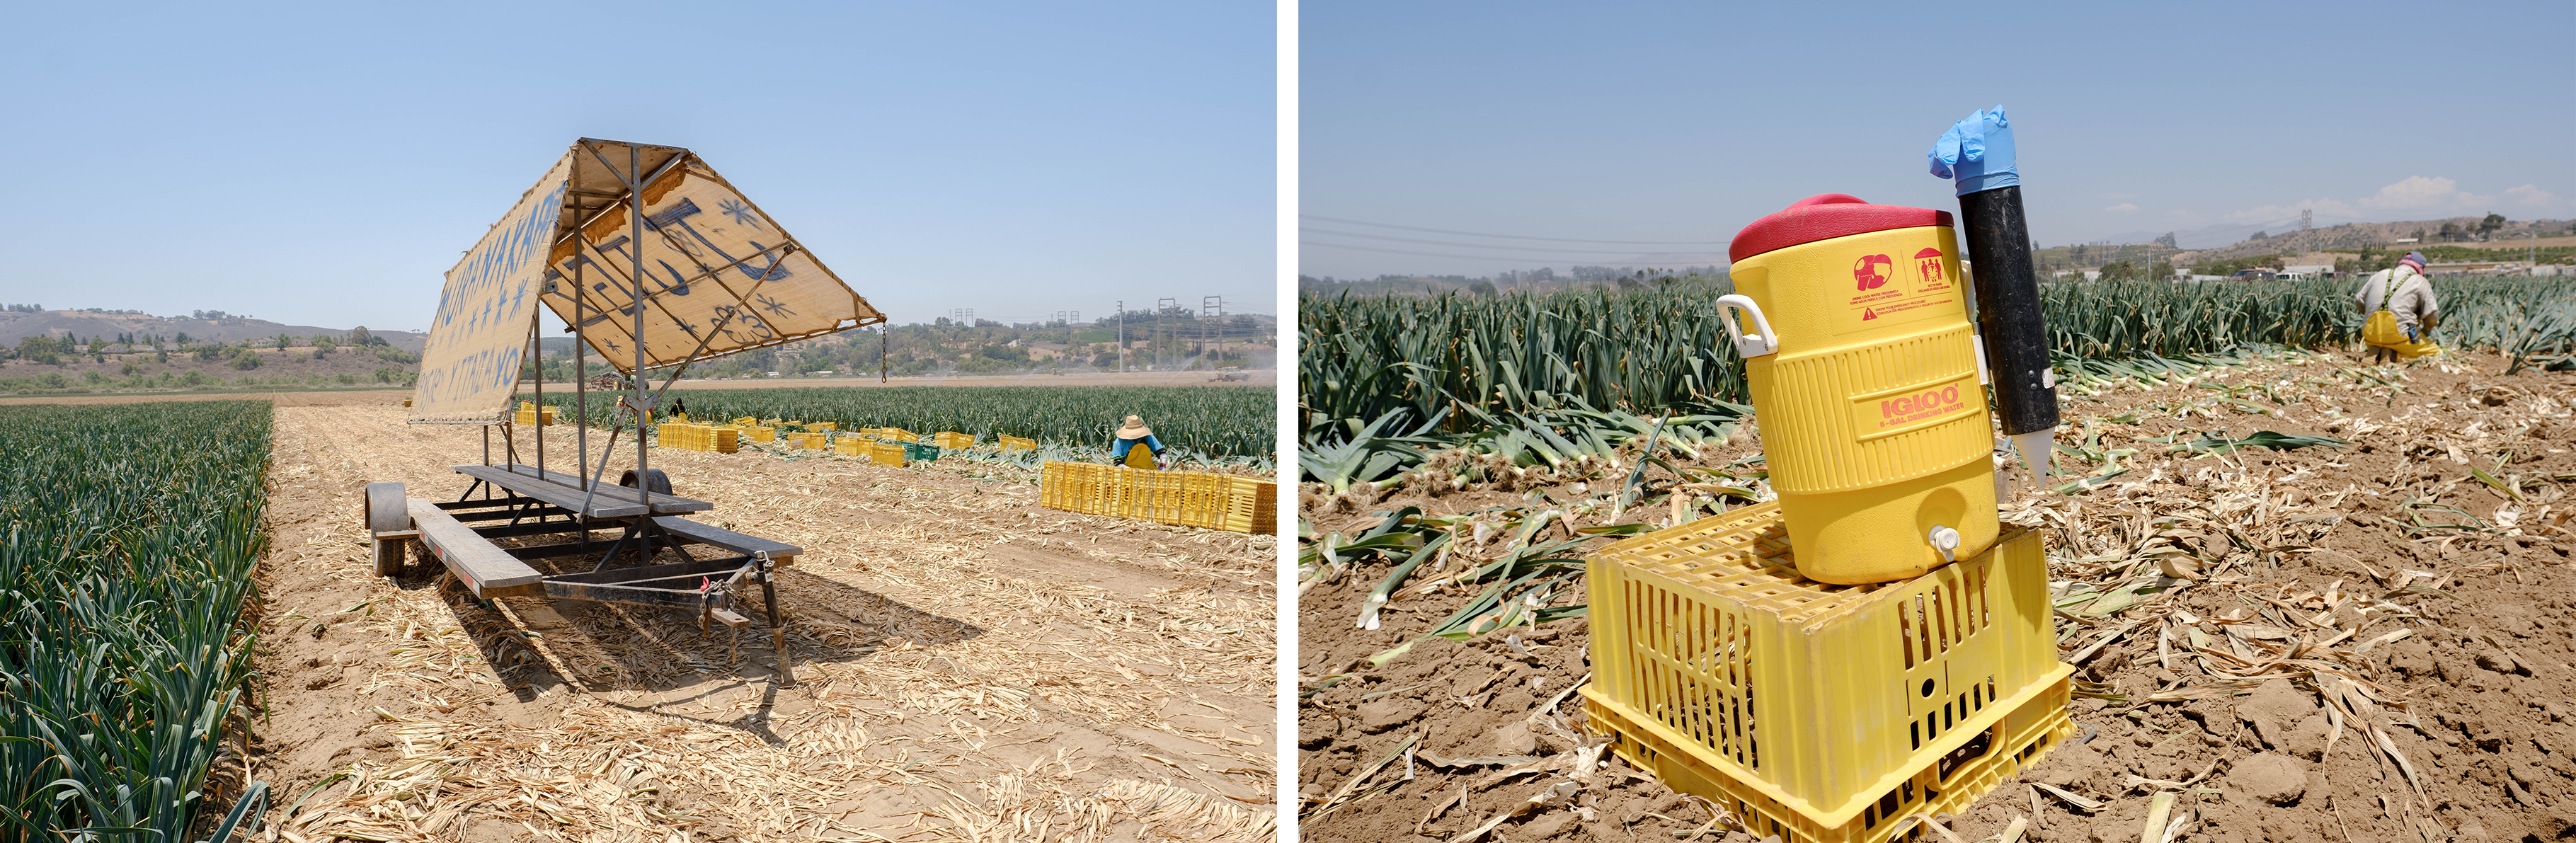 Two photos, one of a freestanding shade structure, one of a water cooler atop a plastic basket, both in the middle of a field.